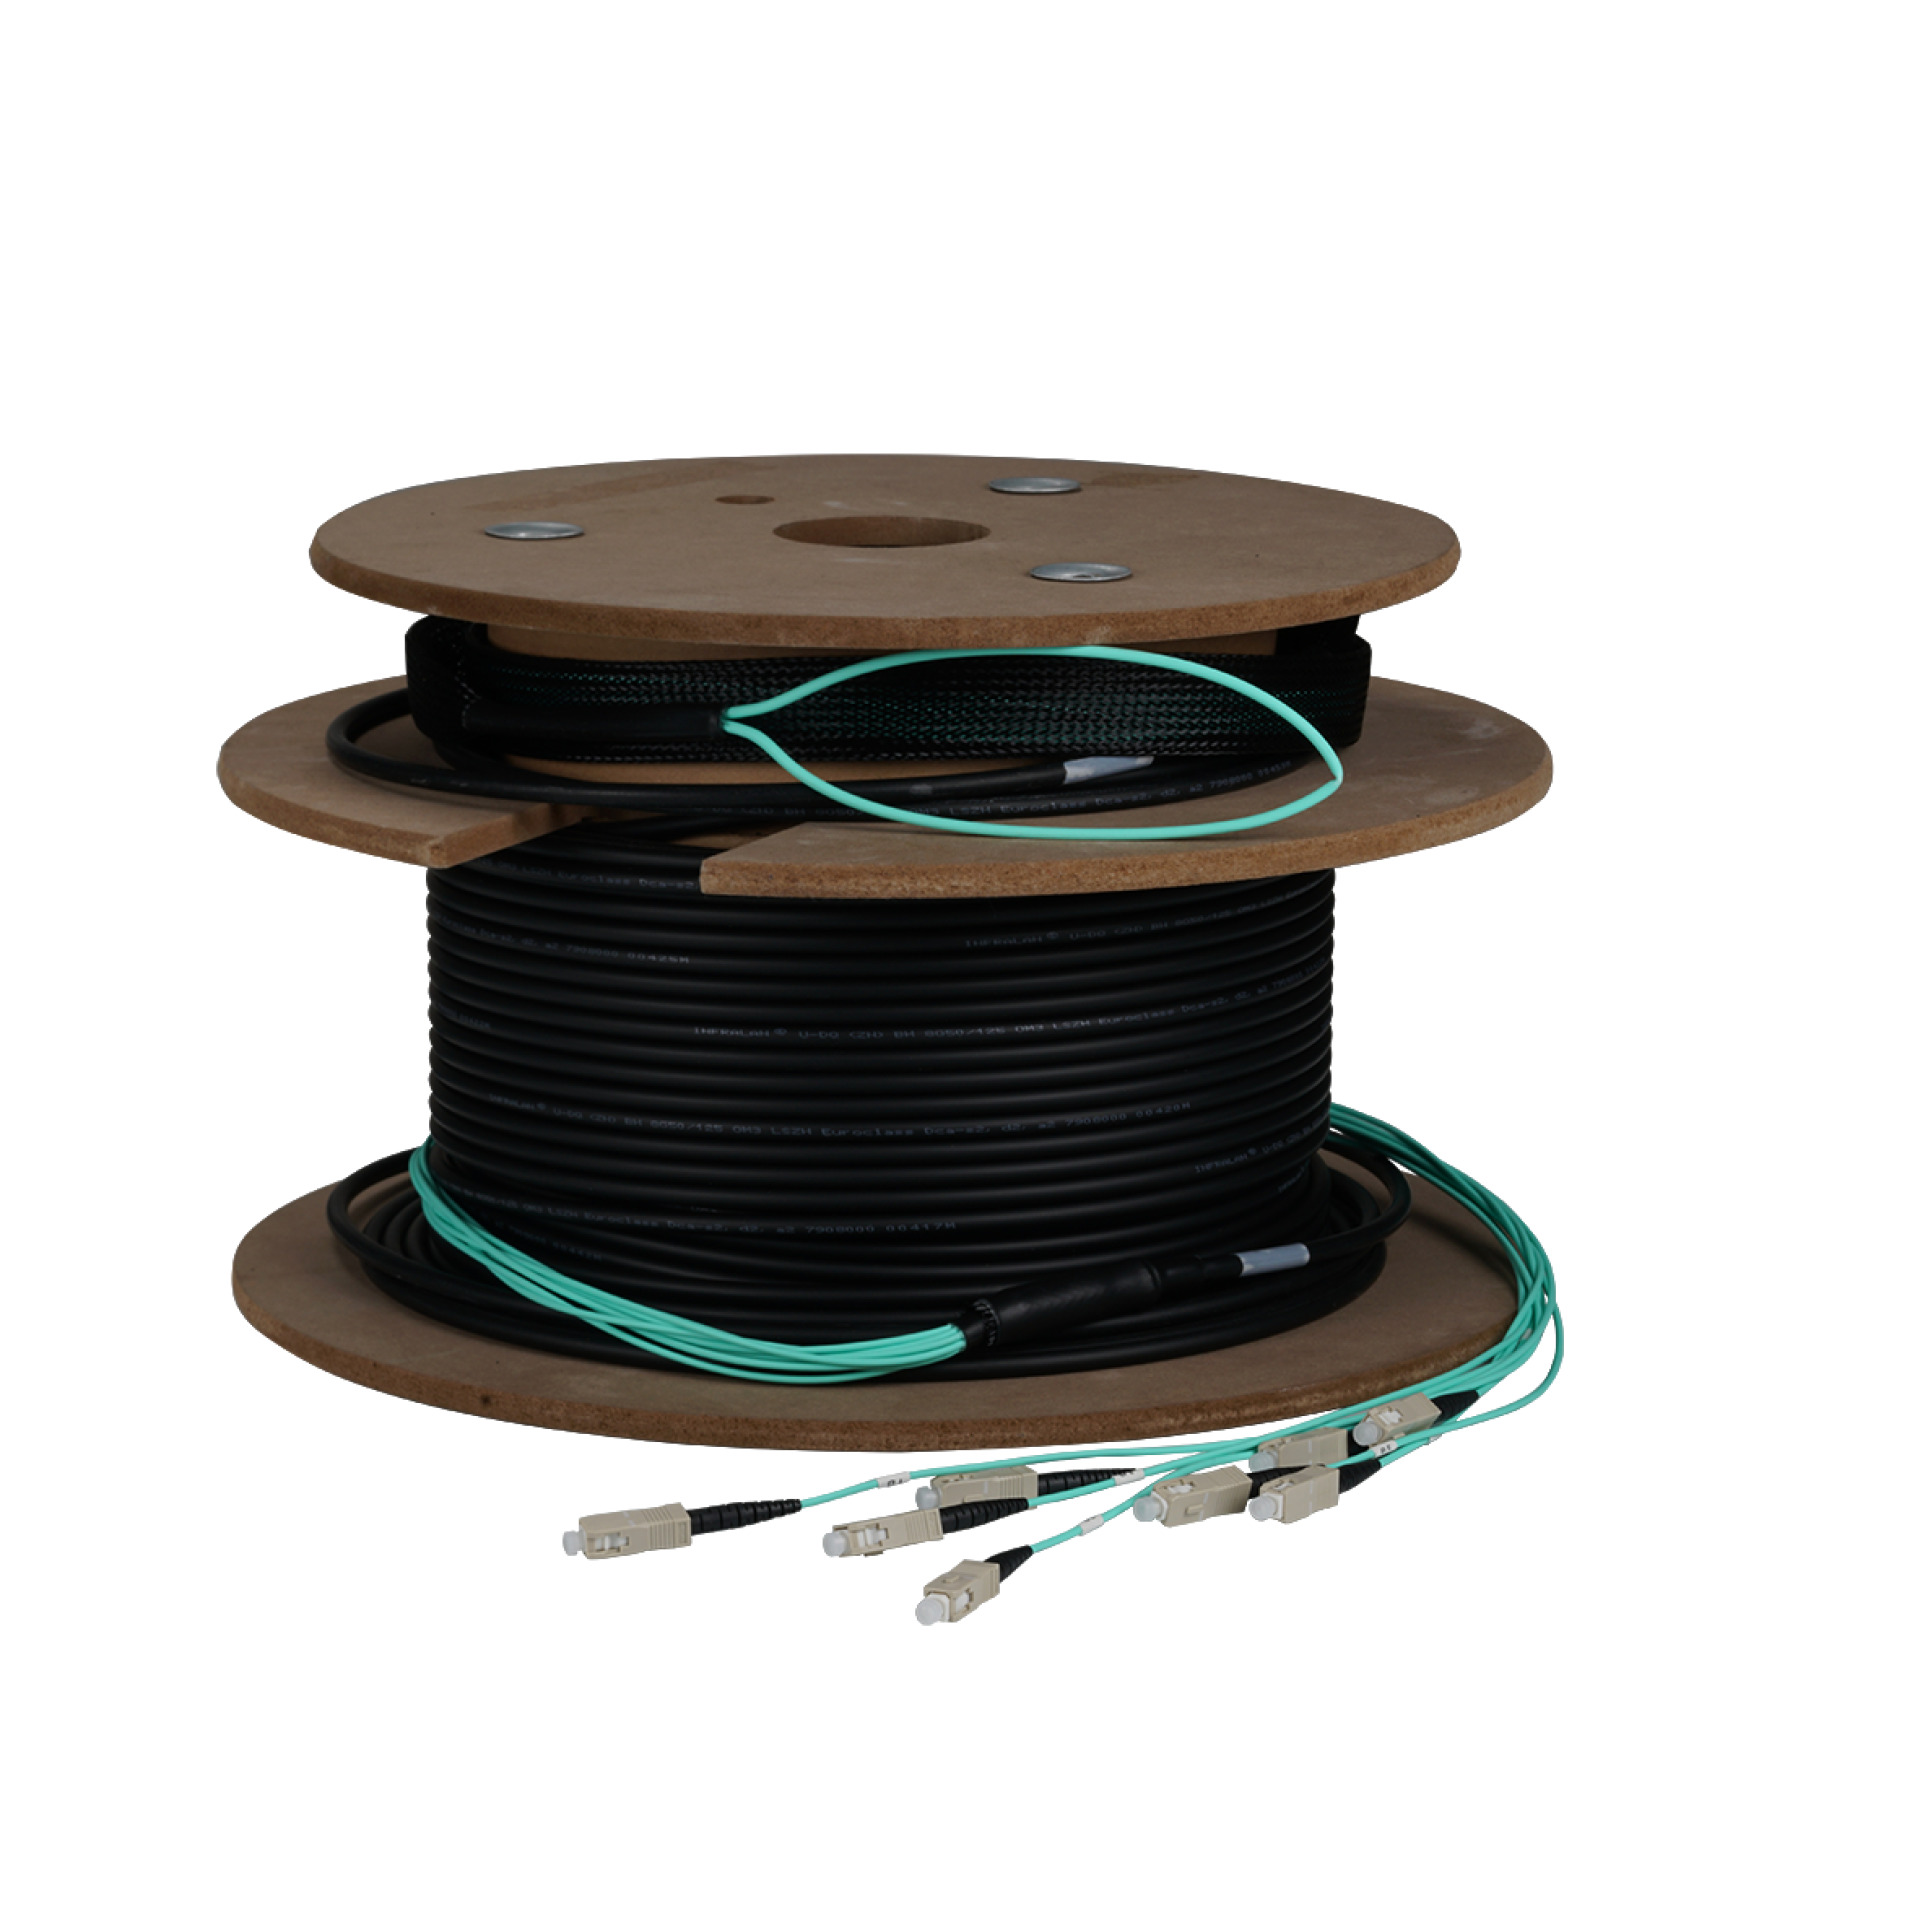 Trunk cable U-DQ(ZN)BH 4G 50/125, SC/SC OM3 100m